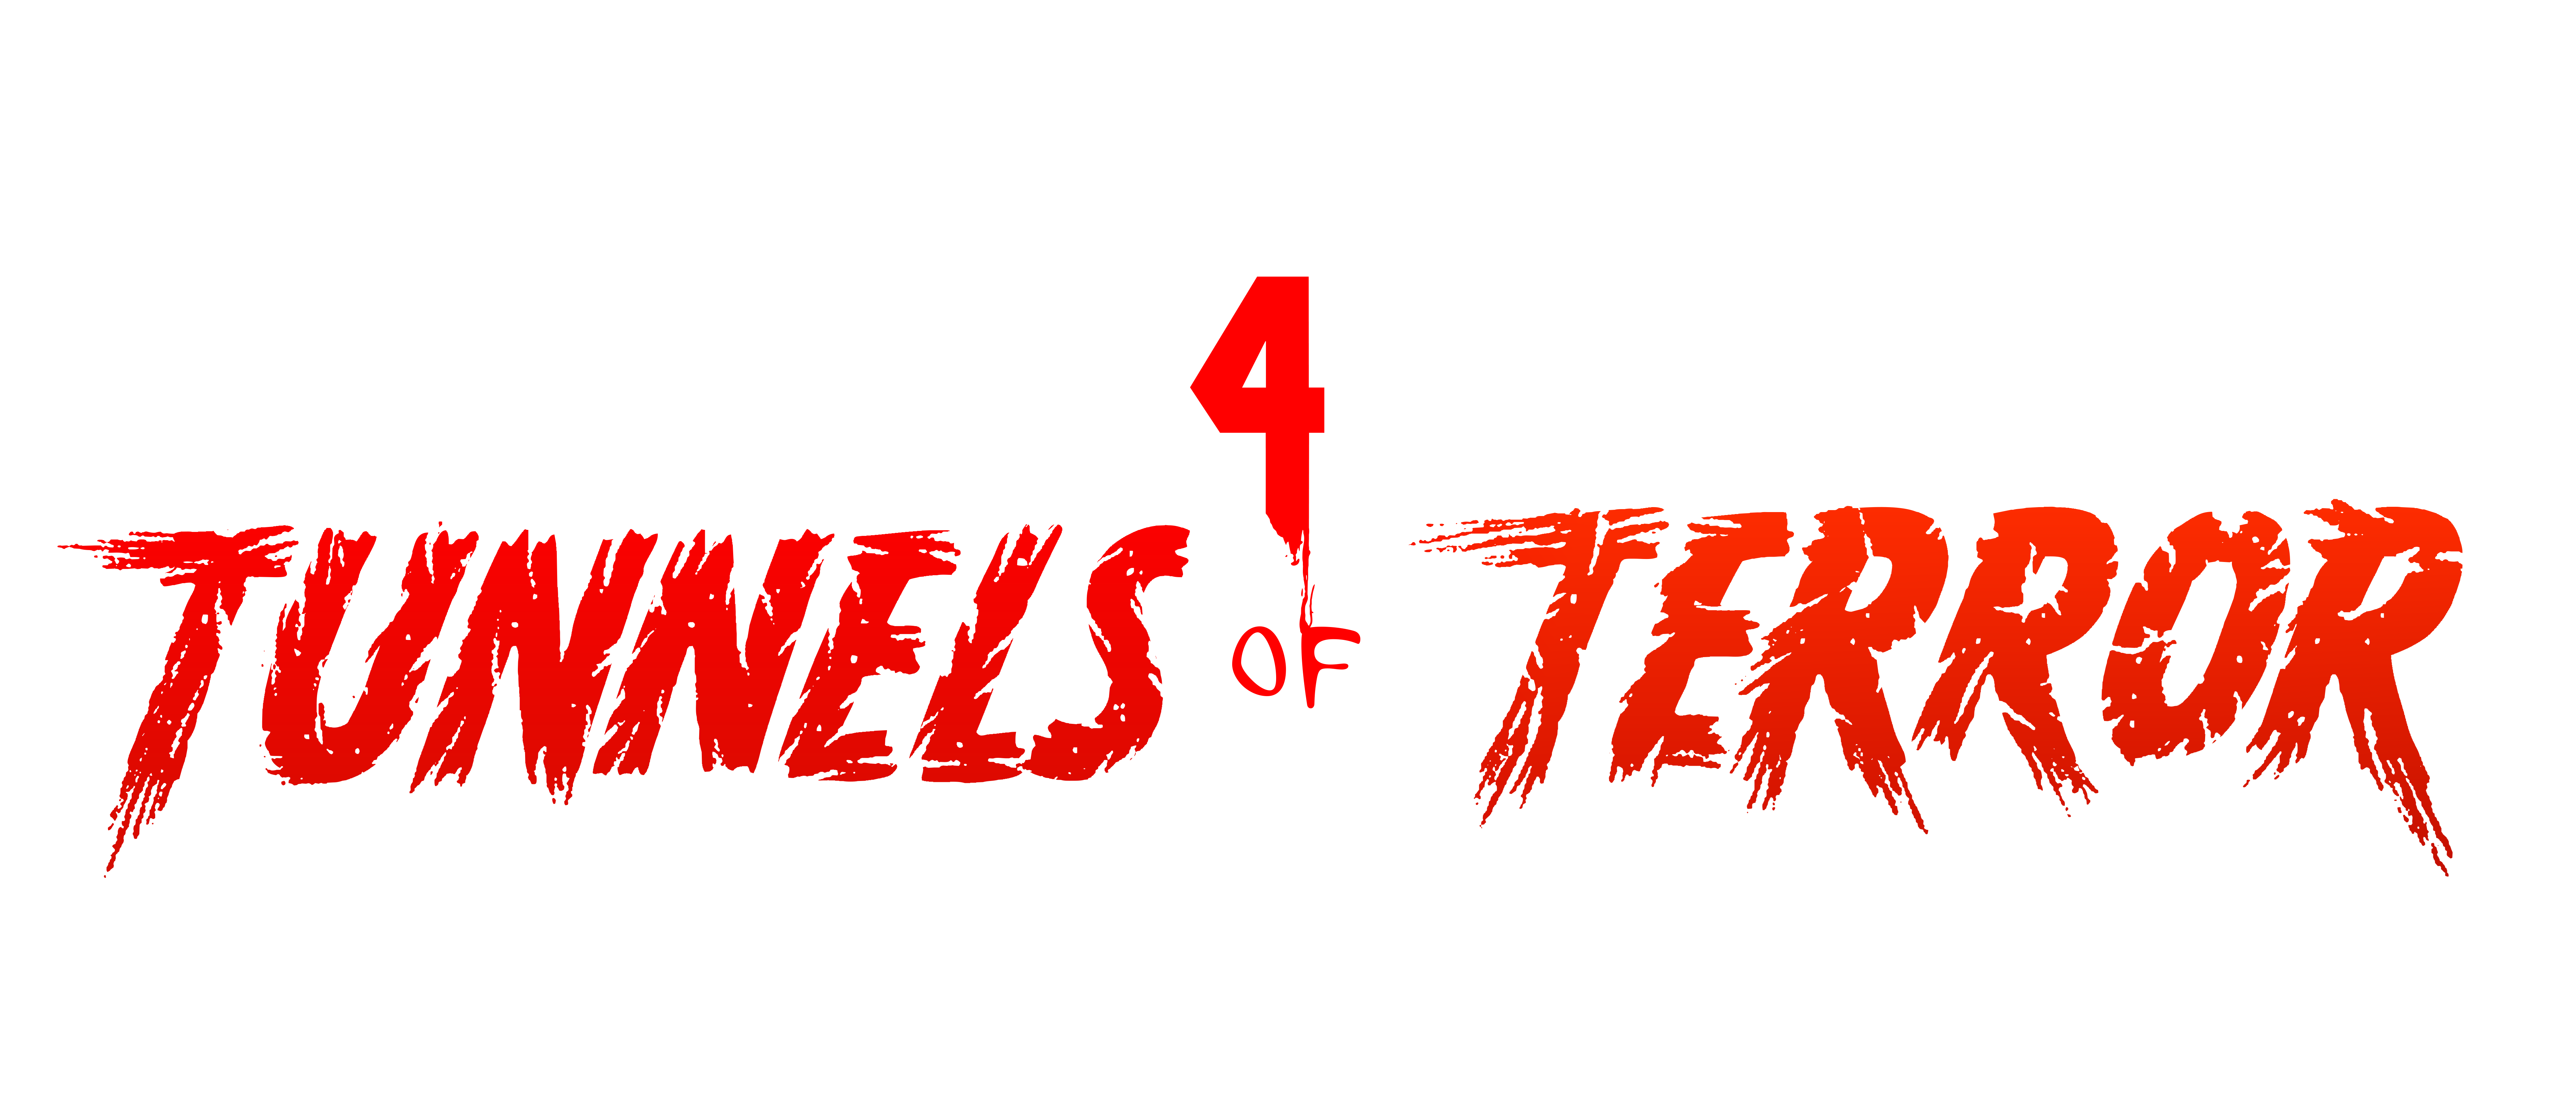 Check out our images from the Back 4 Blood beta